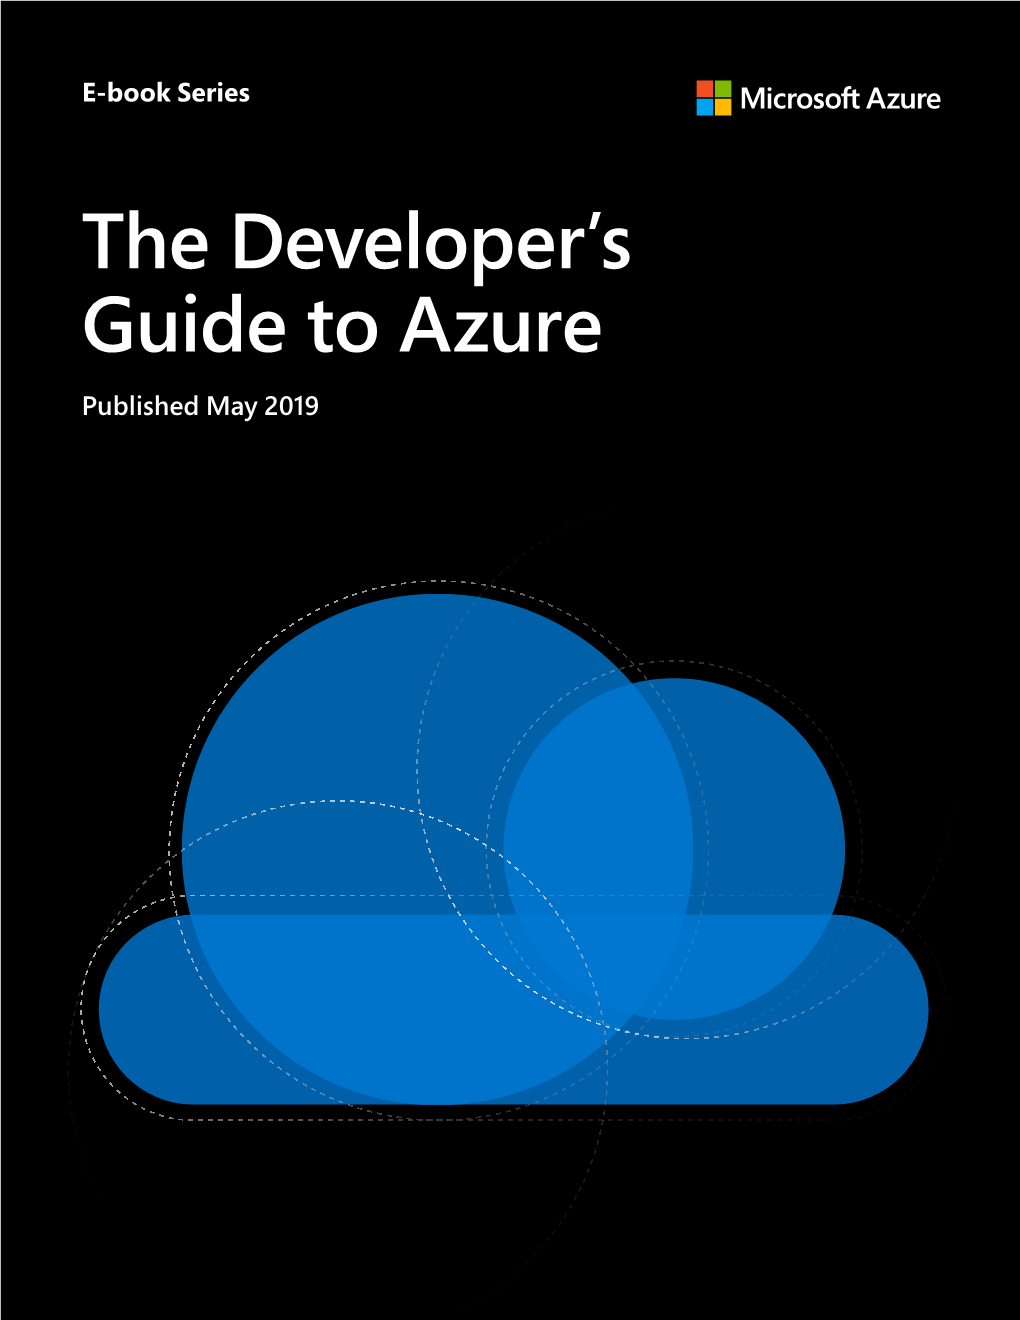 The Developer's Guide to Azure